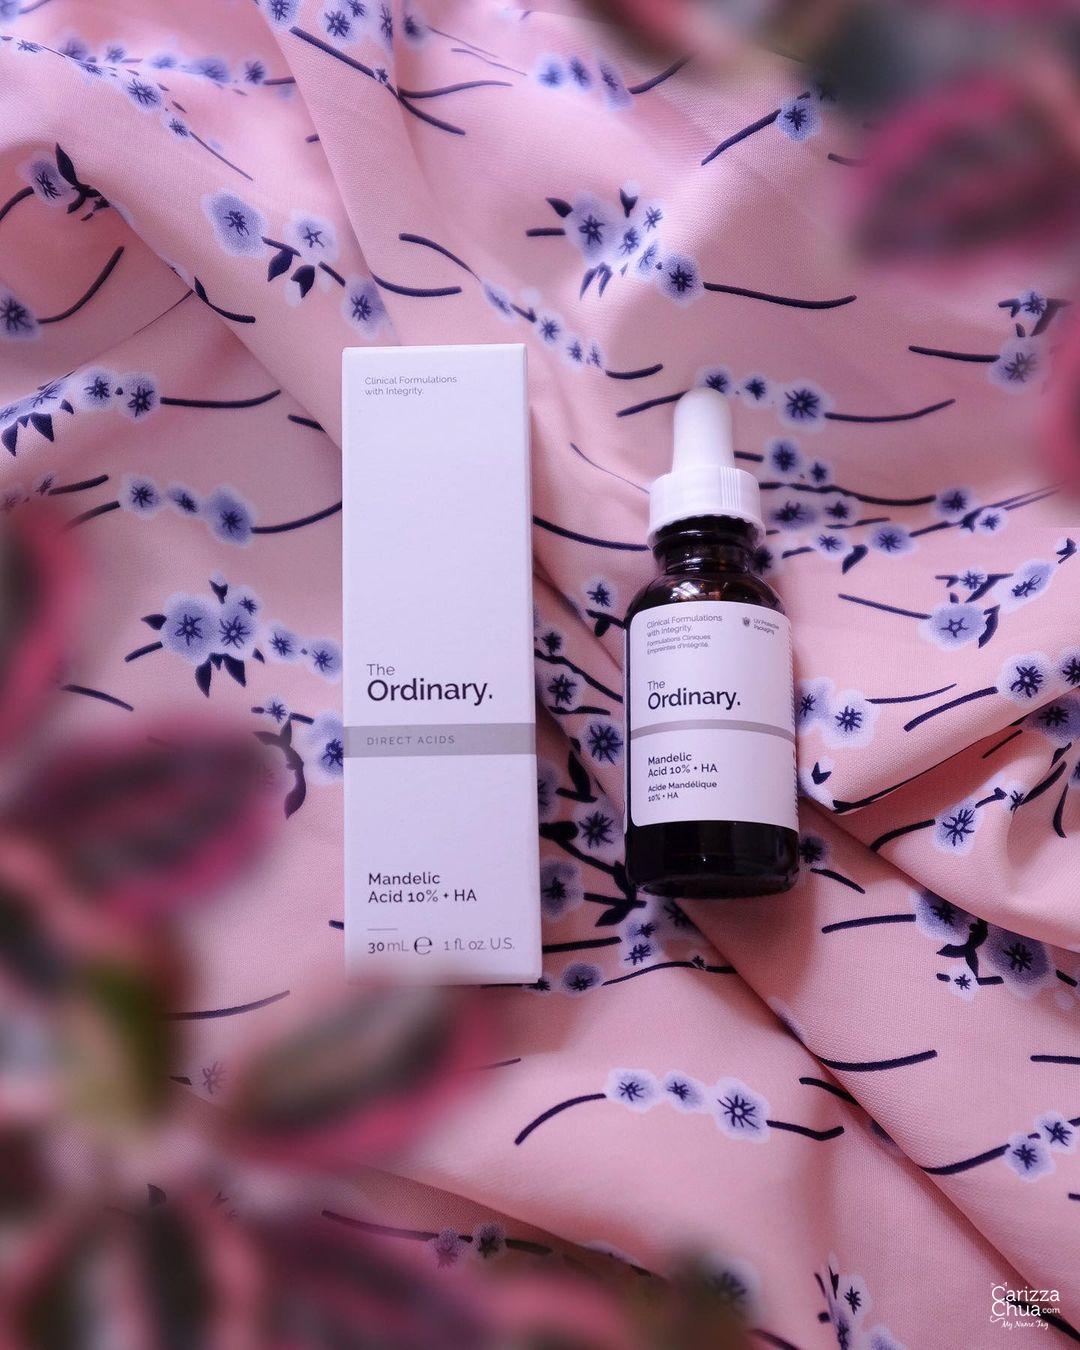 Trying Out The Ordinary Mandelic Acid 10% + HA